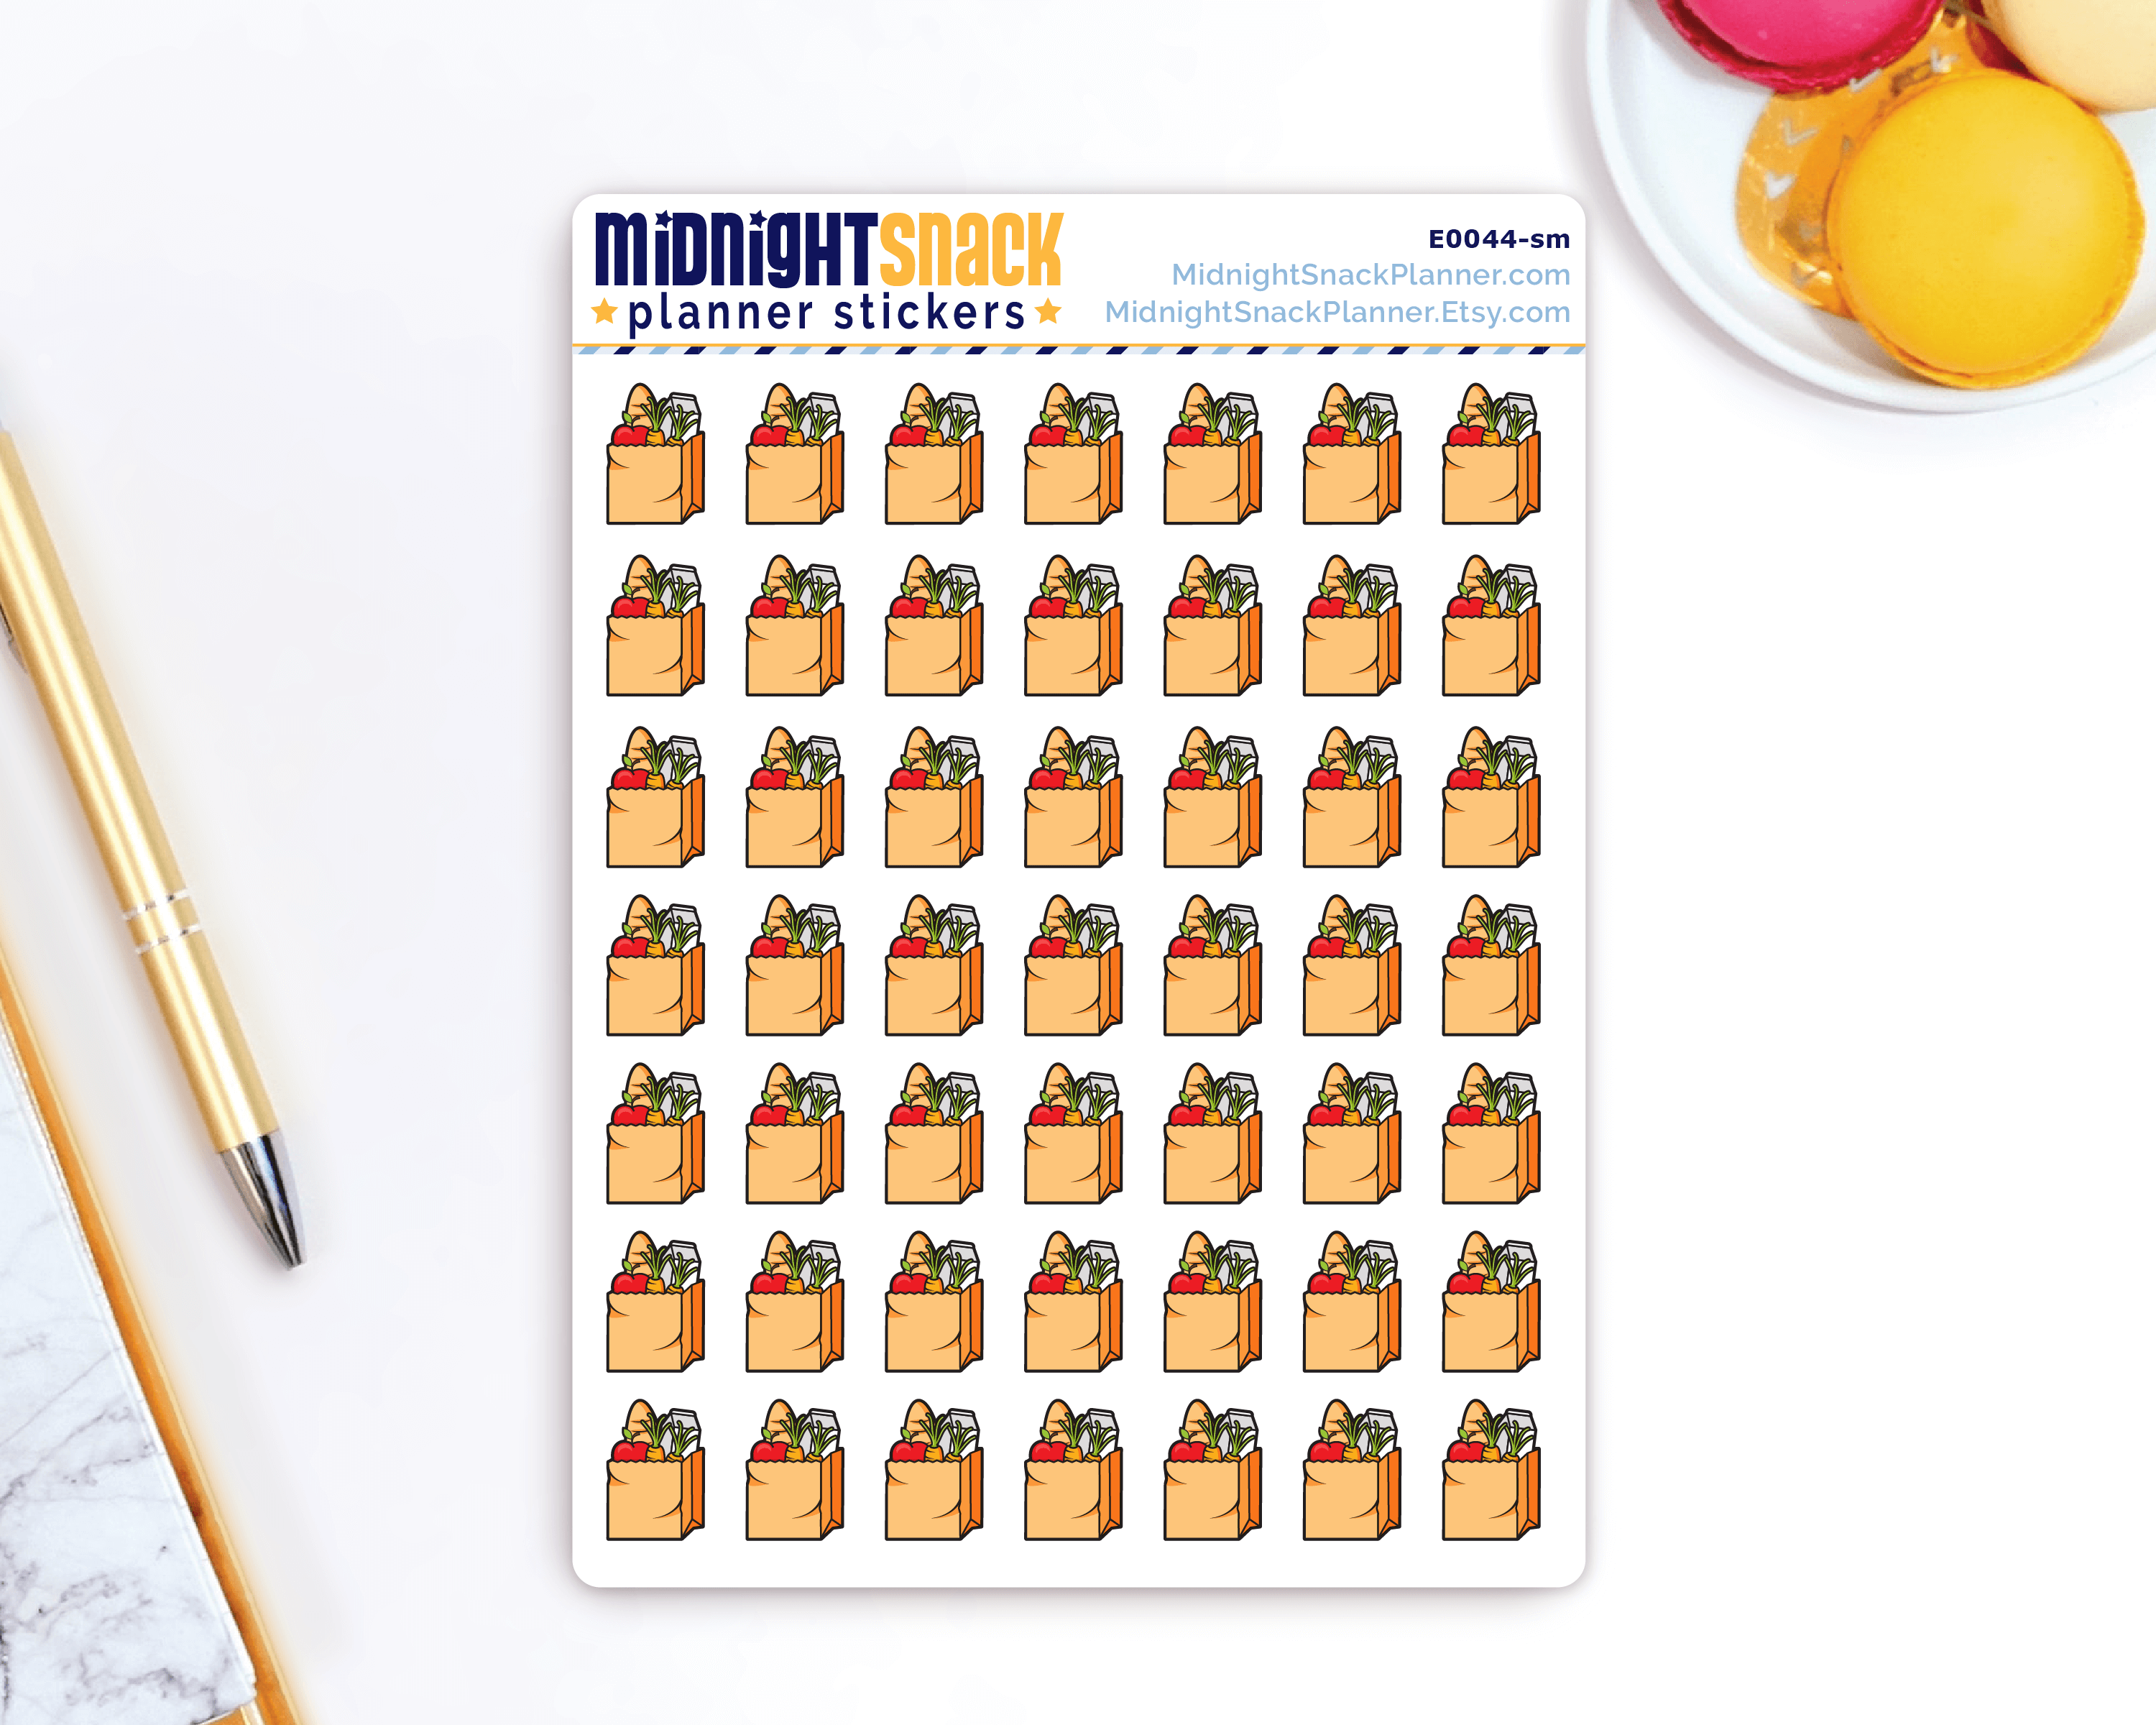 Grocery Shopping Icon: Meal Playing Planner Stickers Midnight Snack Planner